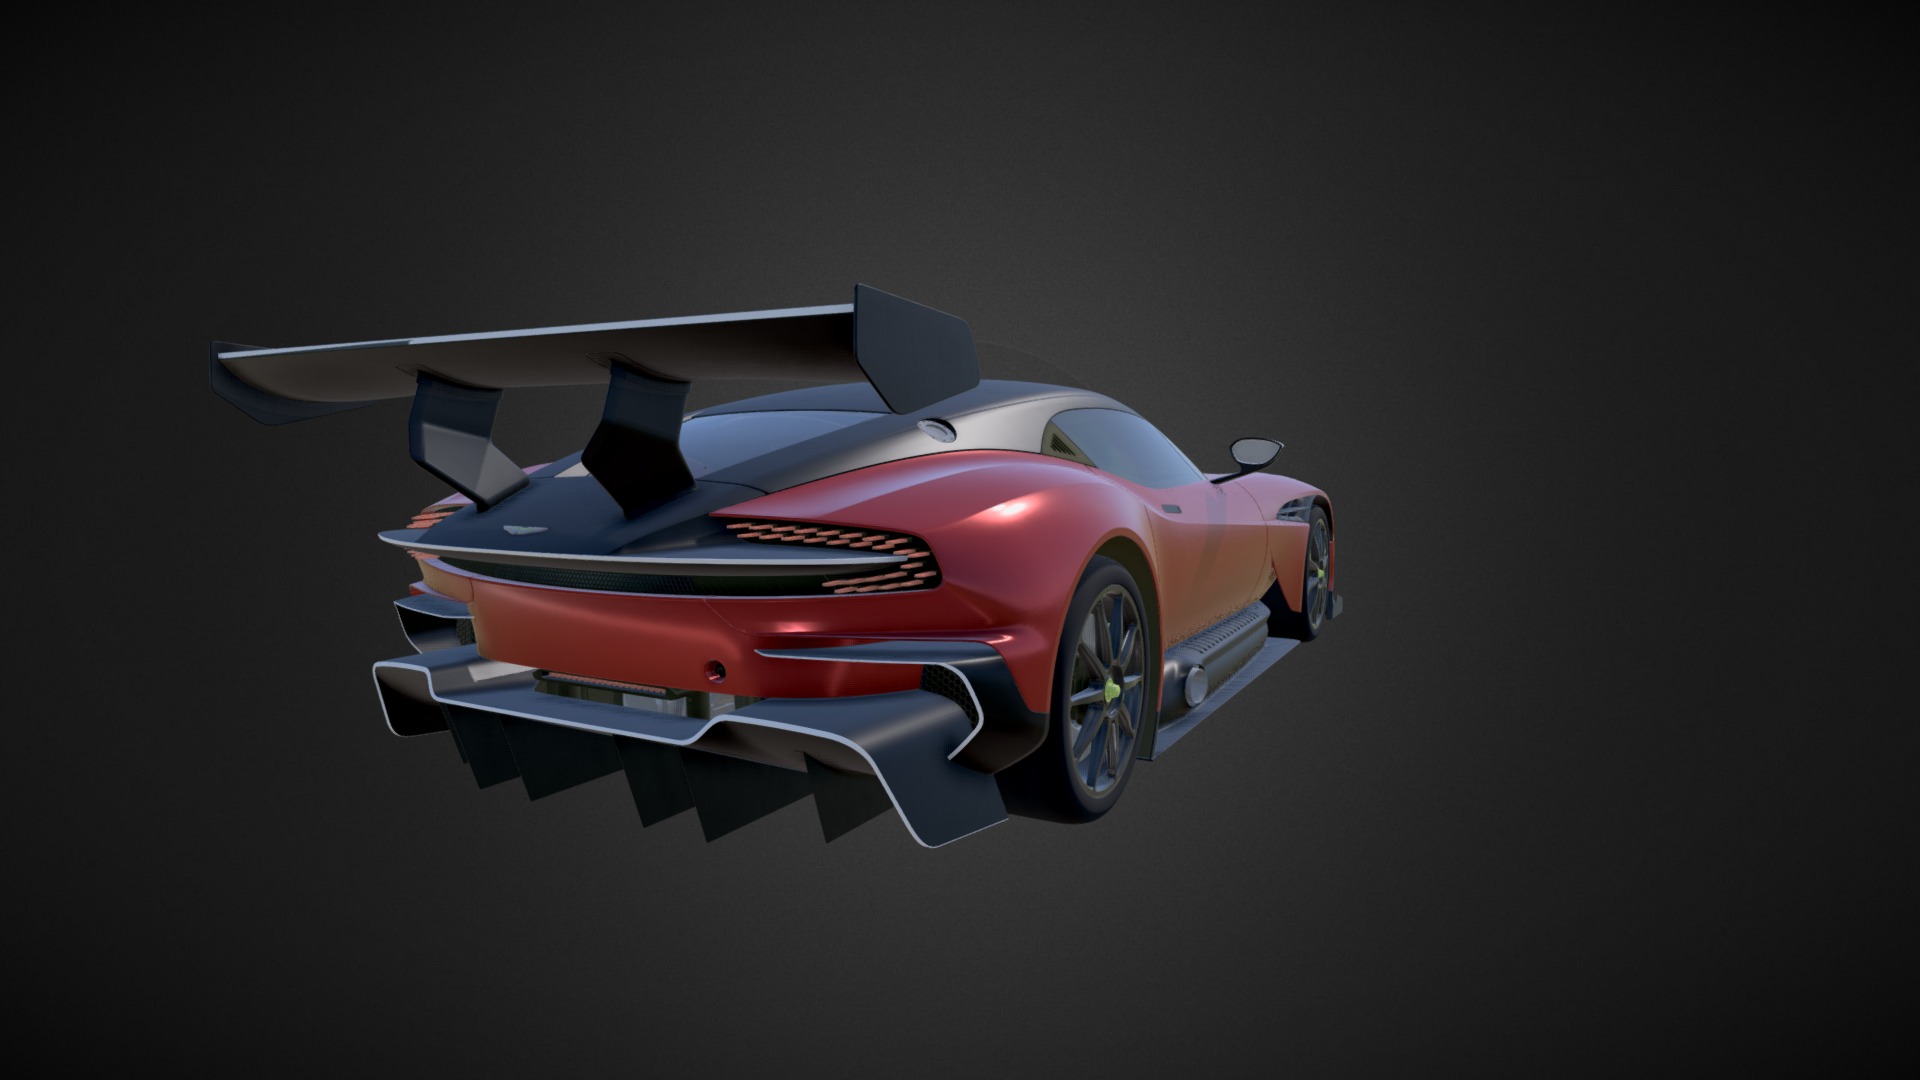 3D model Aston Martin VULCAN - This is a 3D model of the Aston Martin VULCAN. The 3D model is about a red and white sports car.